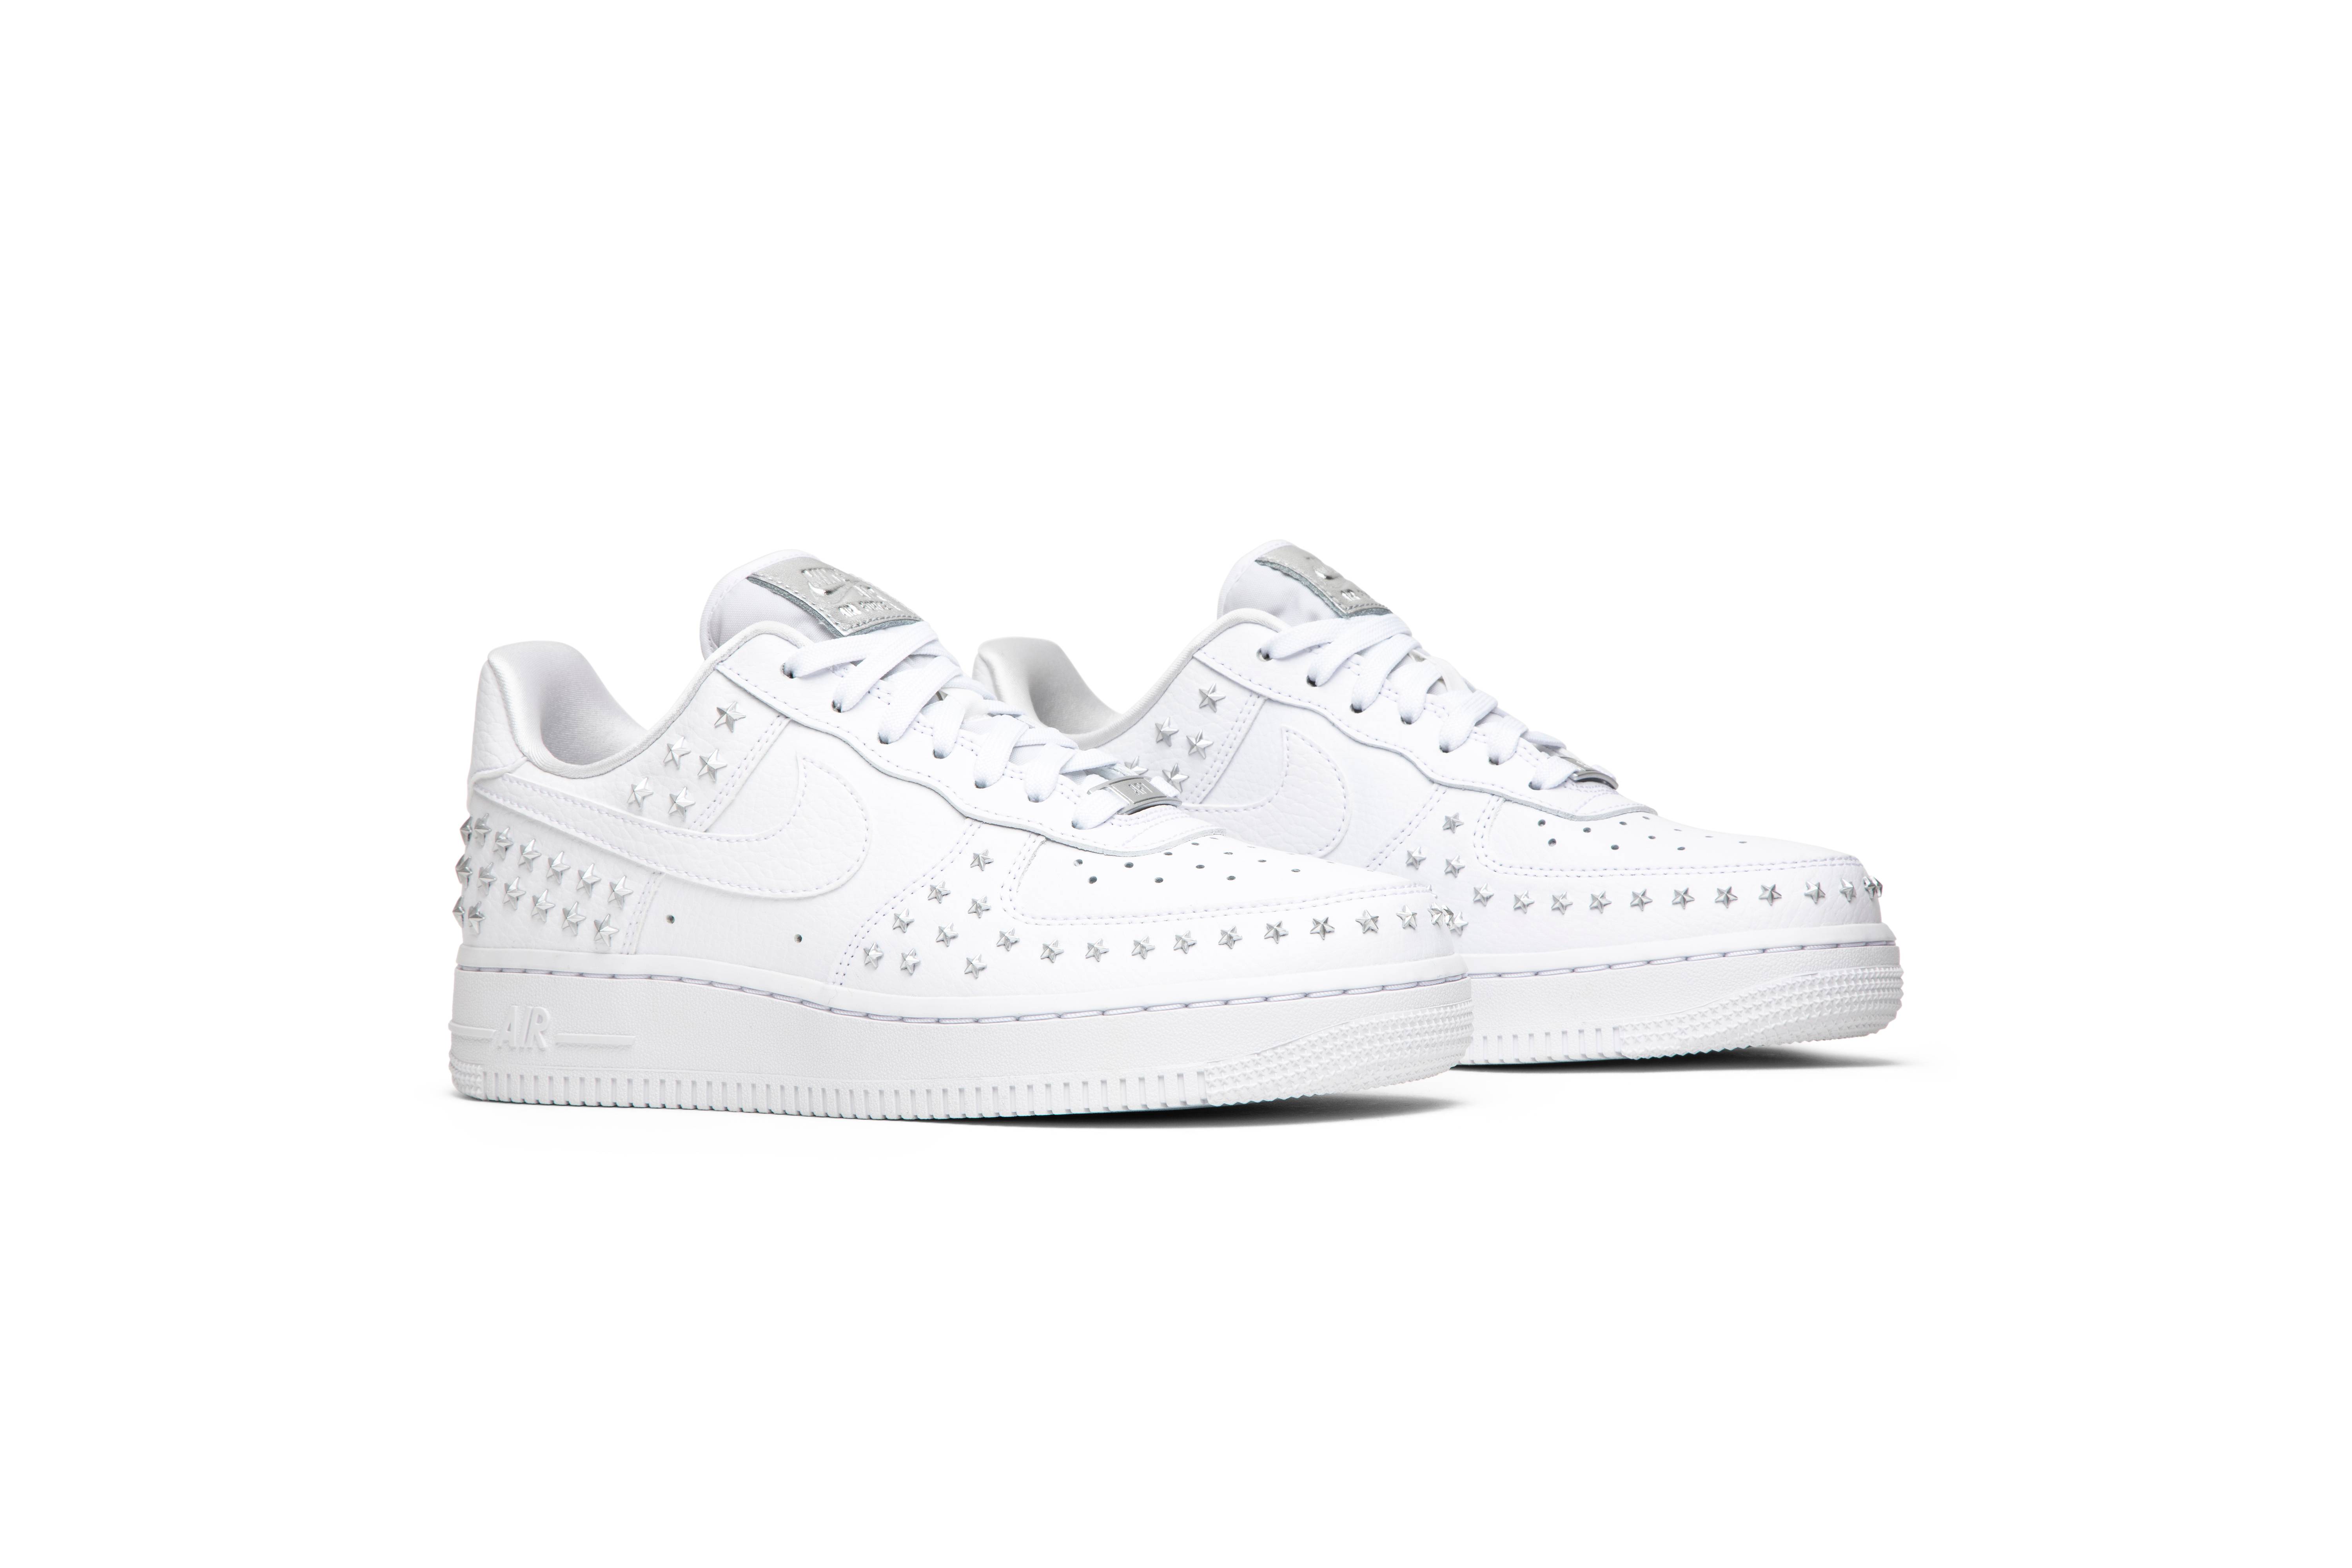 air force 1 white studded